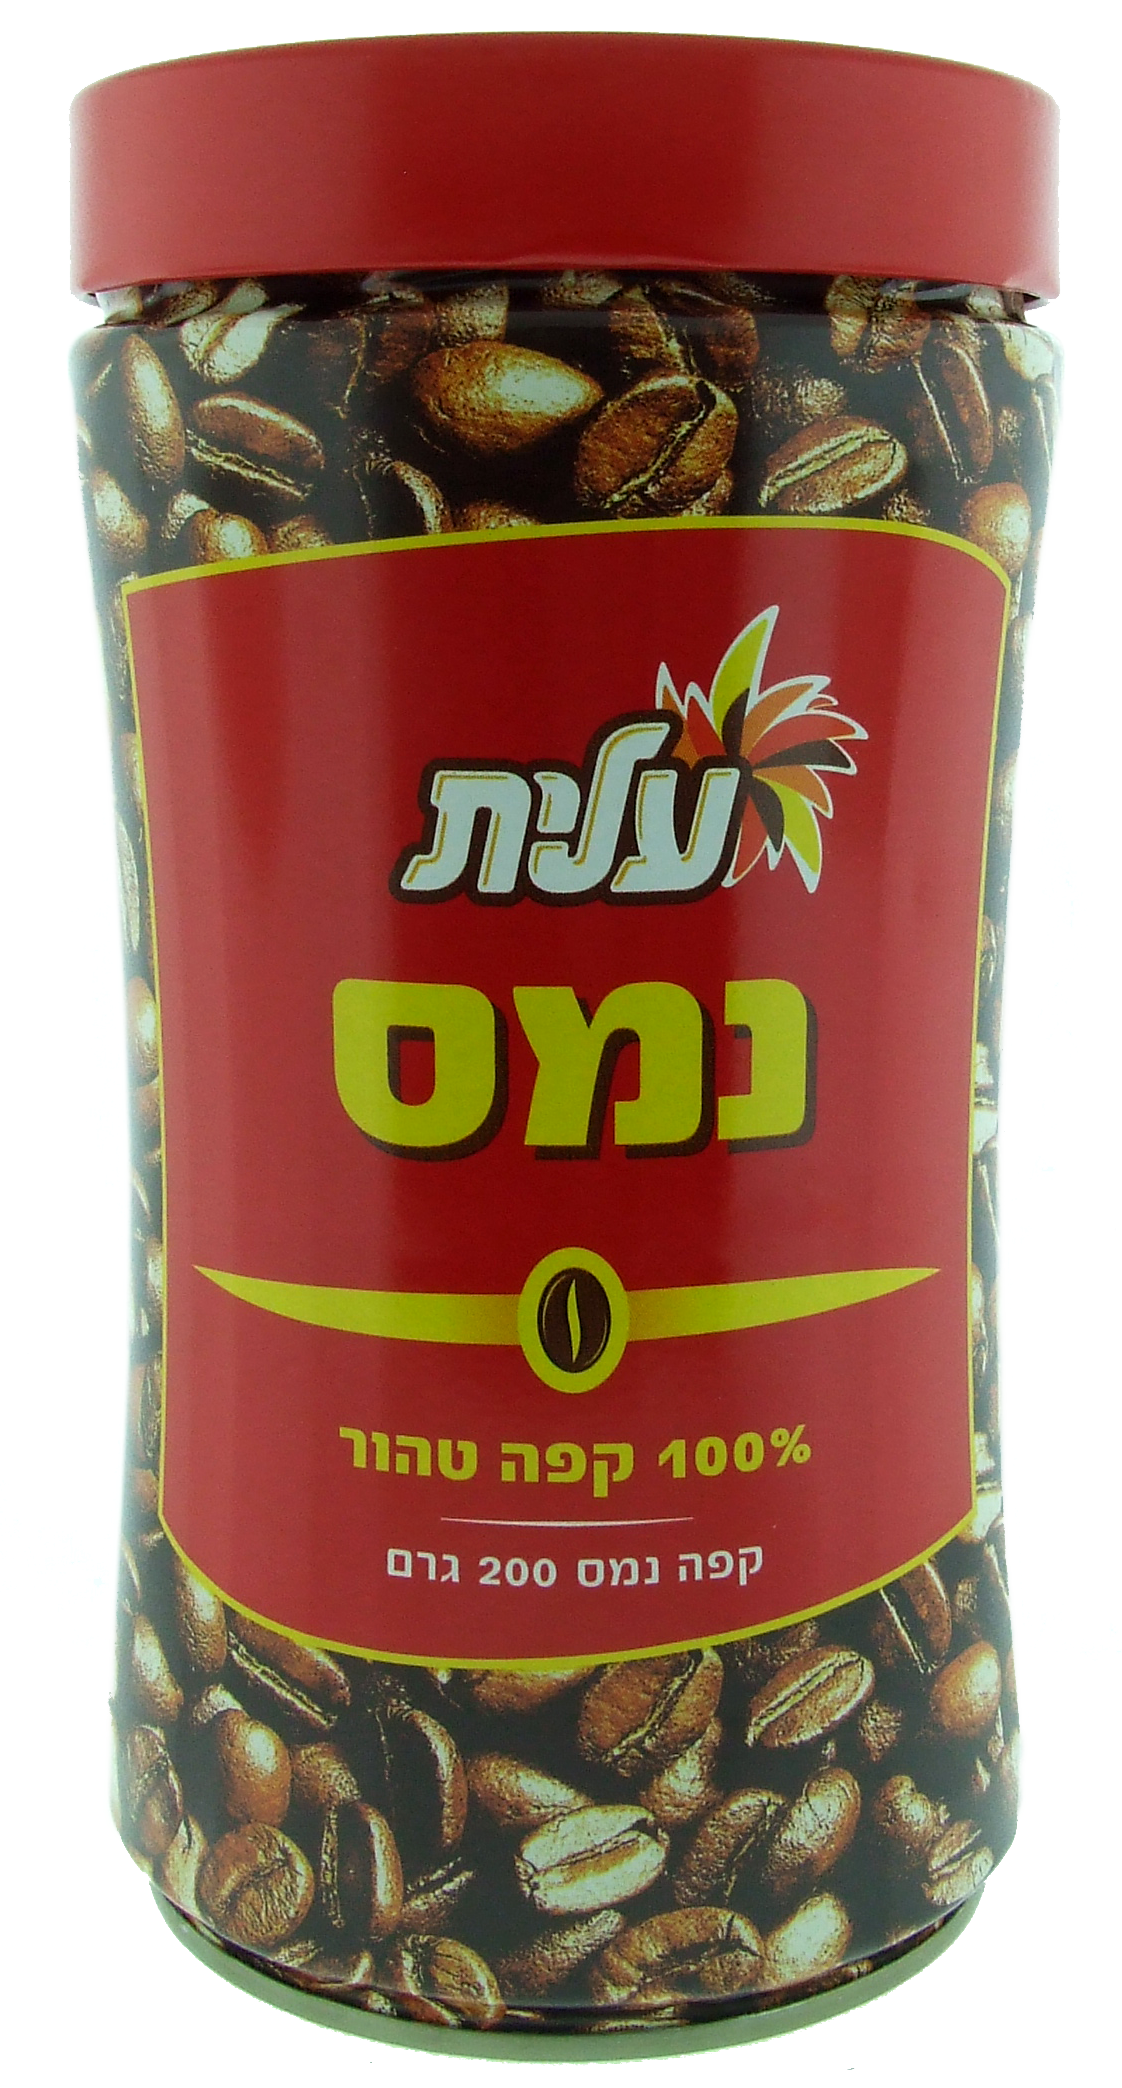 https://www.worldofjudaica.com/media/catalog/product/Assets/NewProductImages/product_page_image_large/2/4/24881_elite_instant_coffee_view_1.jpg